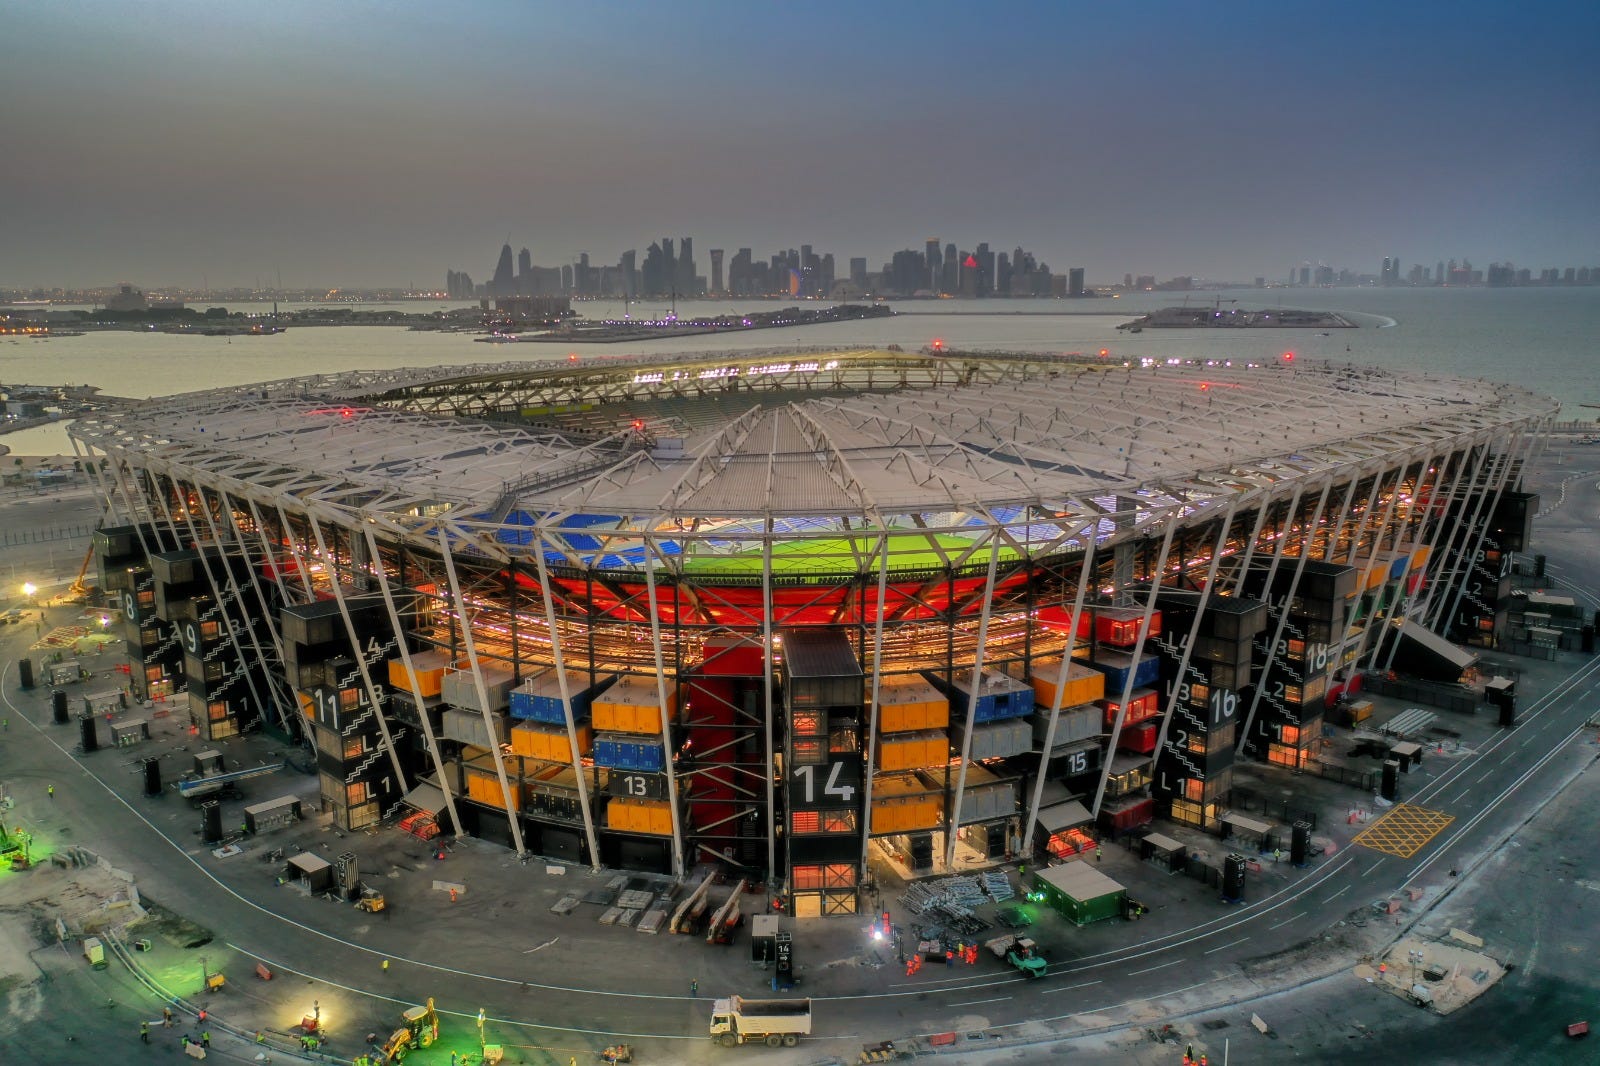 What do you need to know about Stadium 974 - Qatar's latest venue for